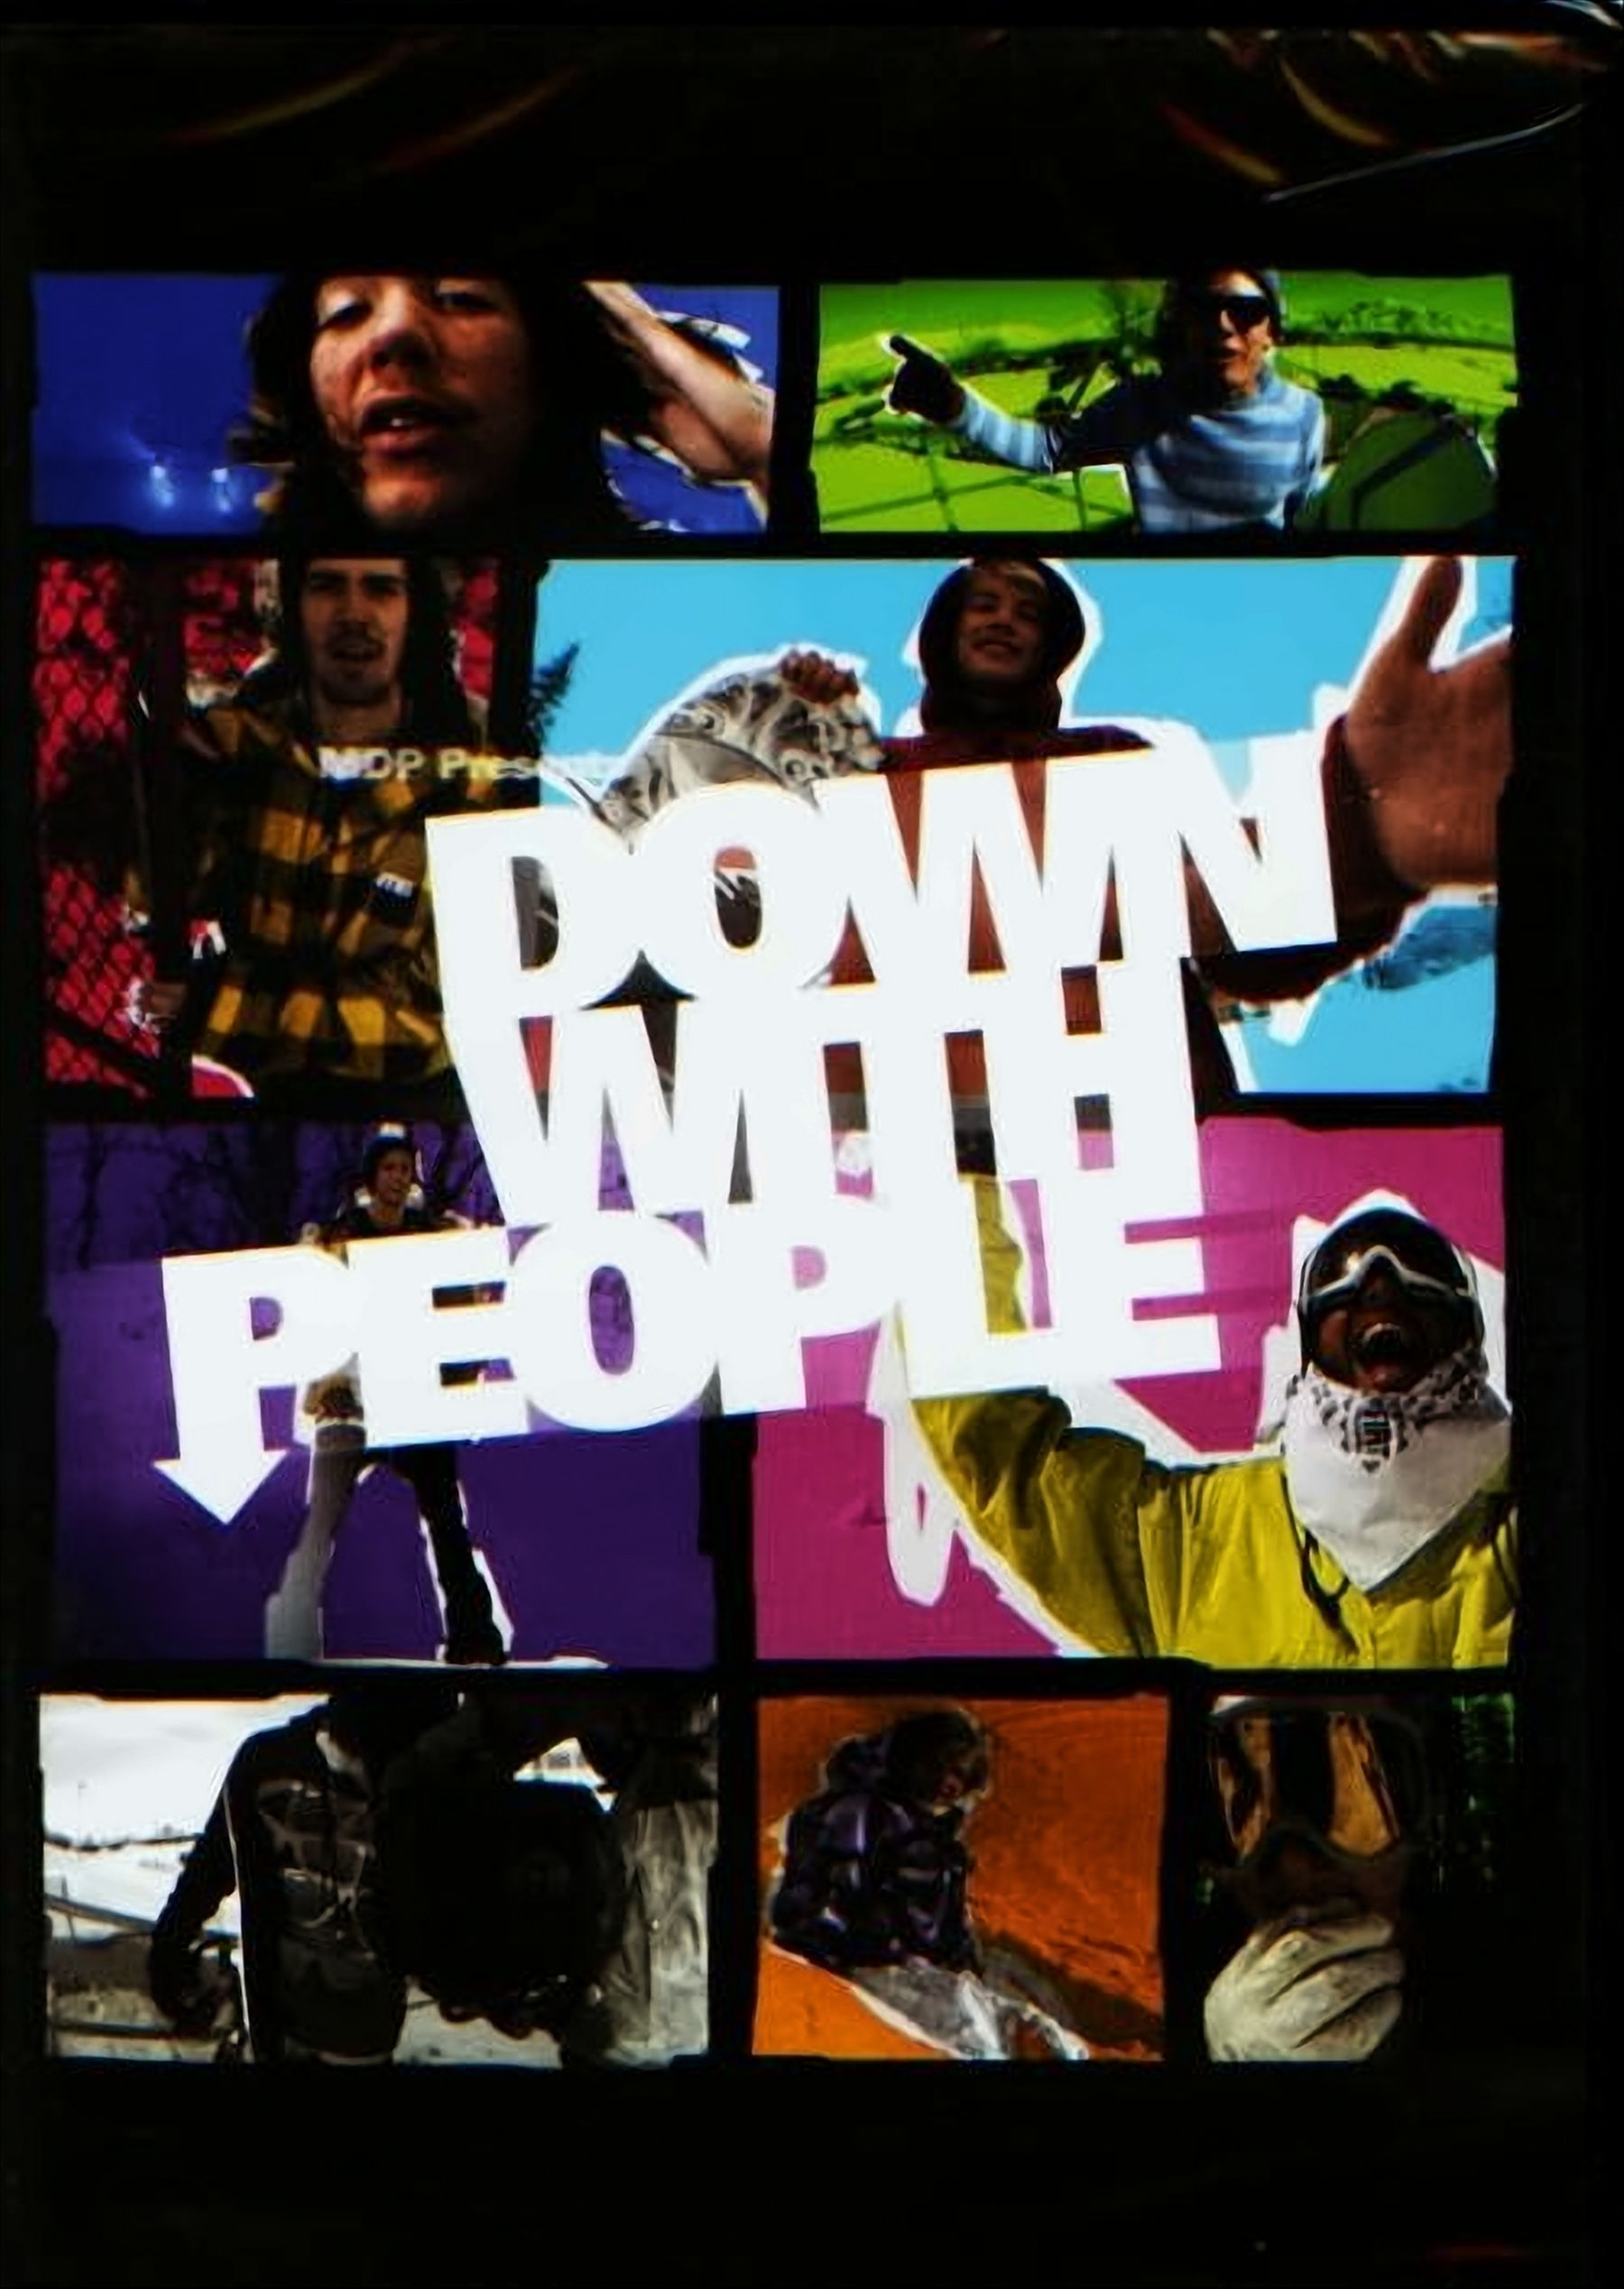 Down DVD with People